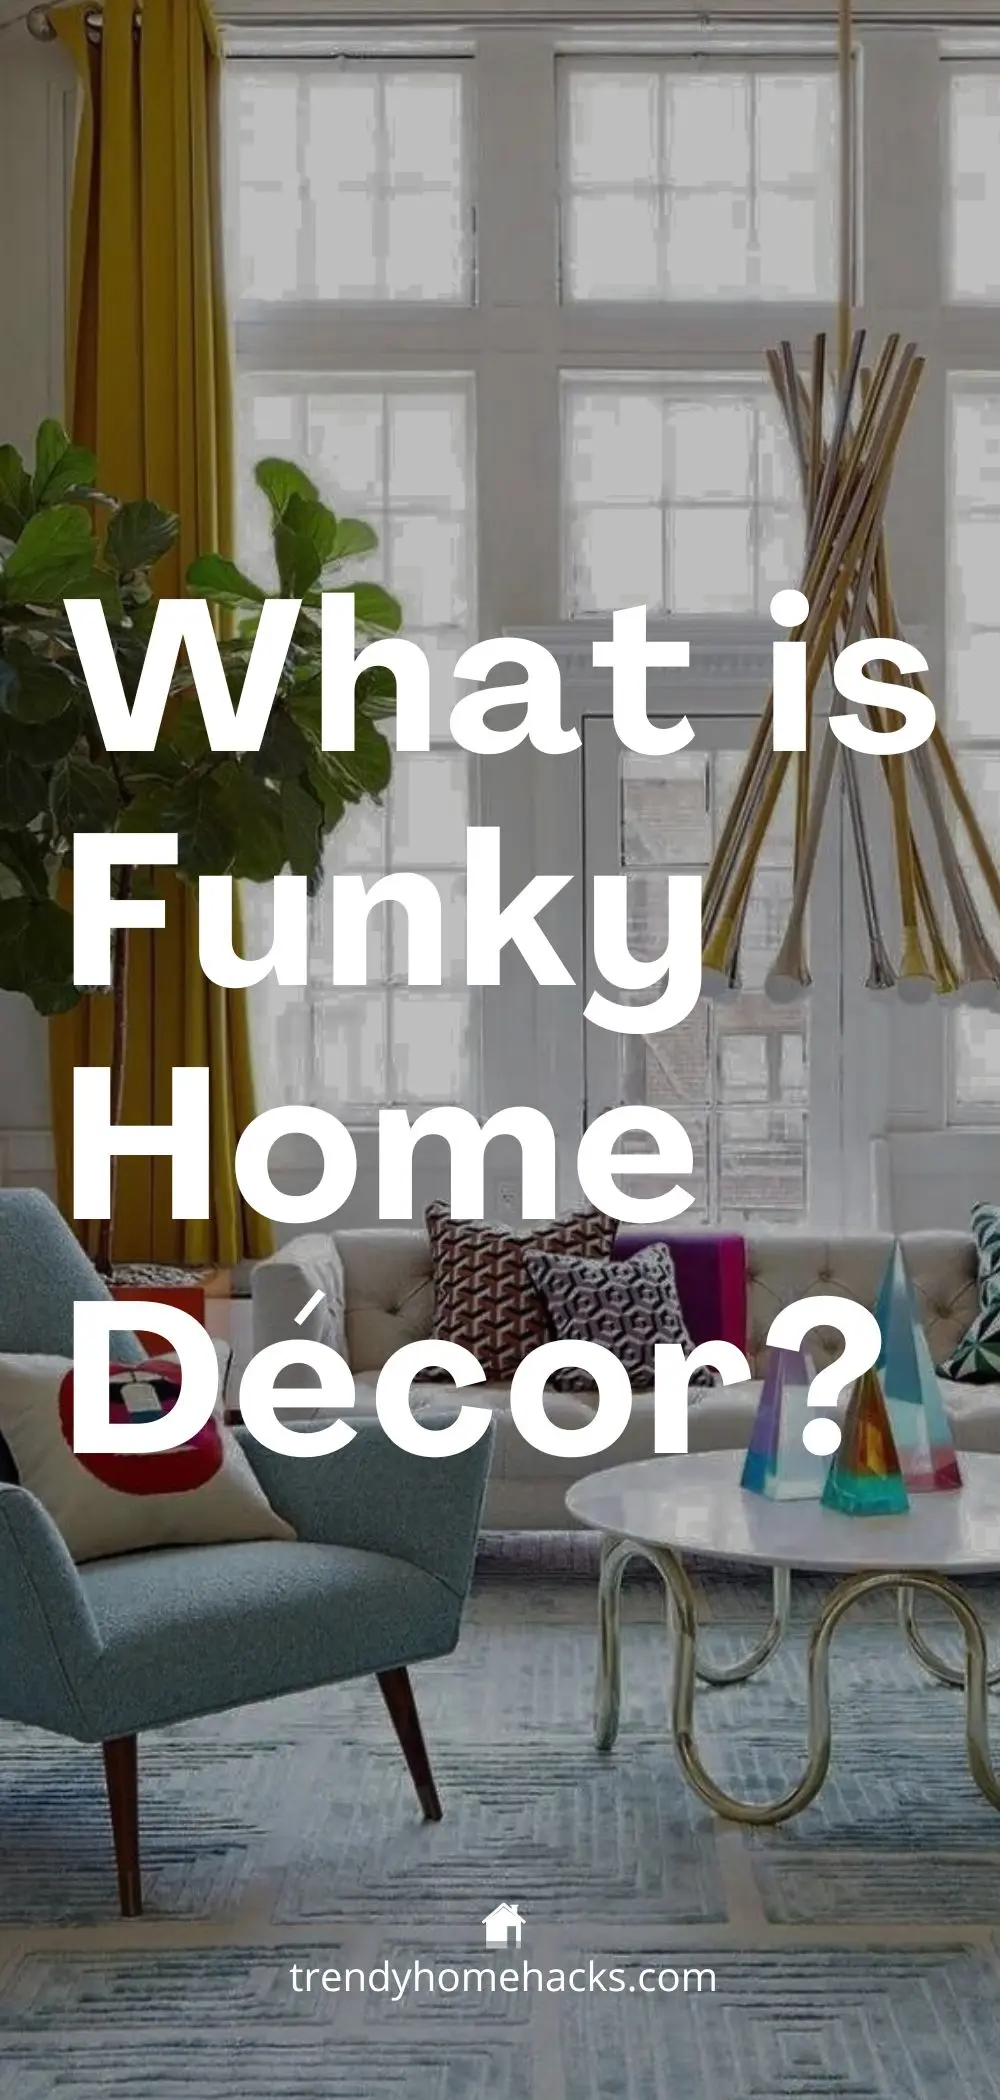 Having a Pinterest pin about this topic "what is funky home decor?" makes it easy to share this content as a useful resource on Pinterest for later.